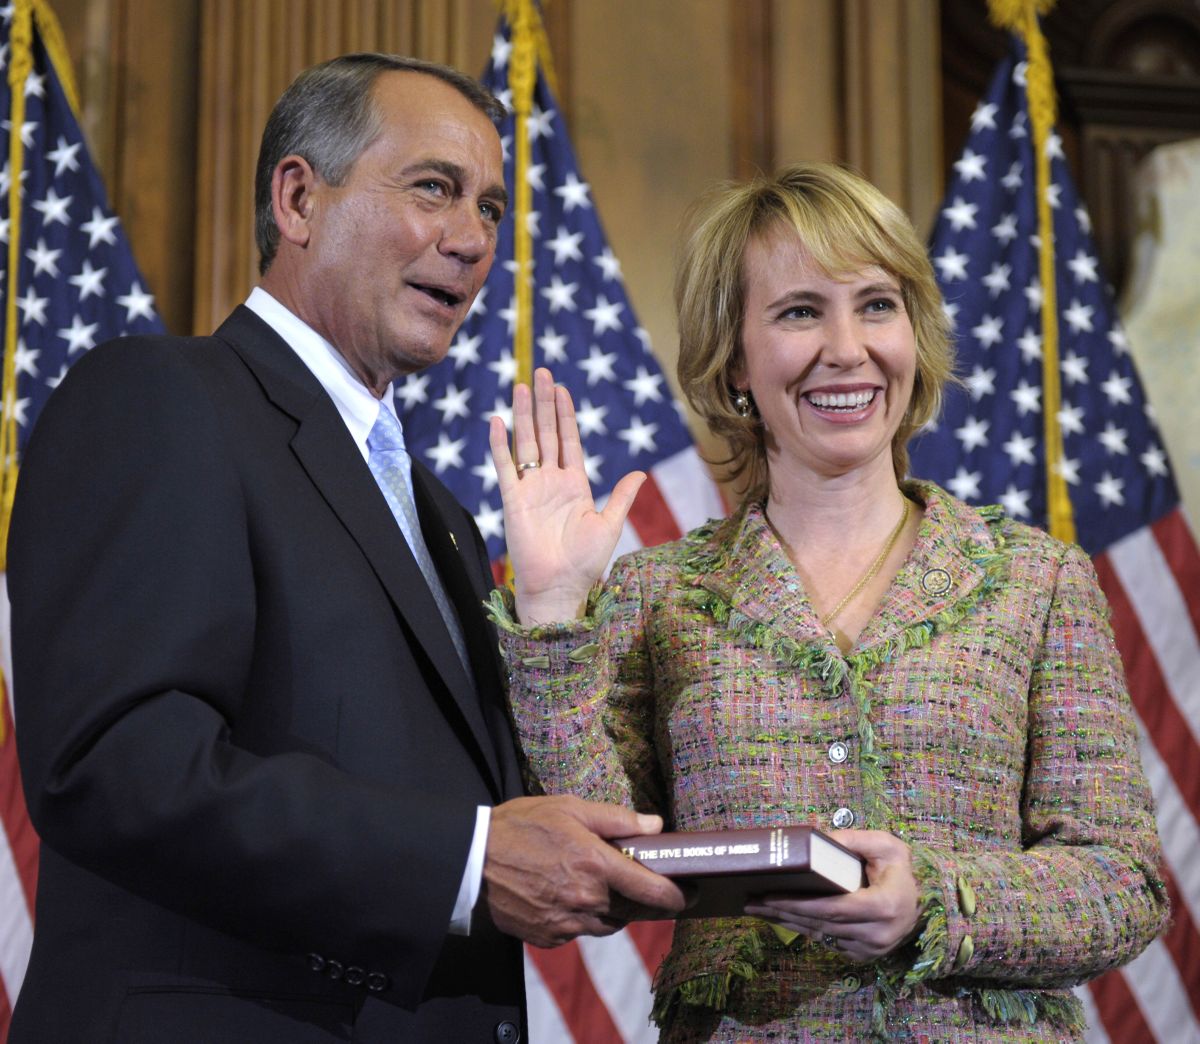 In this Jan. 5, 2011 file photo, House Speaker John Boehner reenacts the swearing in of Rep. Gabrielle Giffords, D-Ariz., on Capitol Hill in Washington. Authorities say that Giffords was shot in the head on Saturday, Jan. 8, 2011 while meeting with constituents in her district in the area around Tucson. (Susan Walsh / Associated Press)